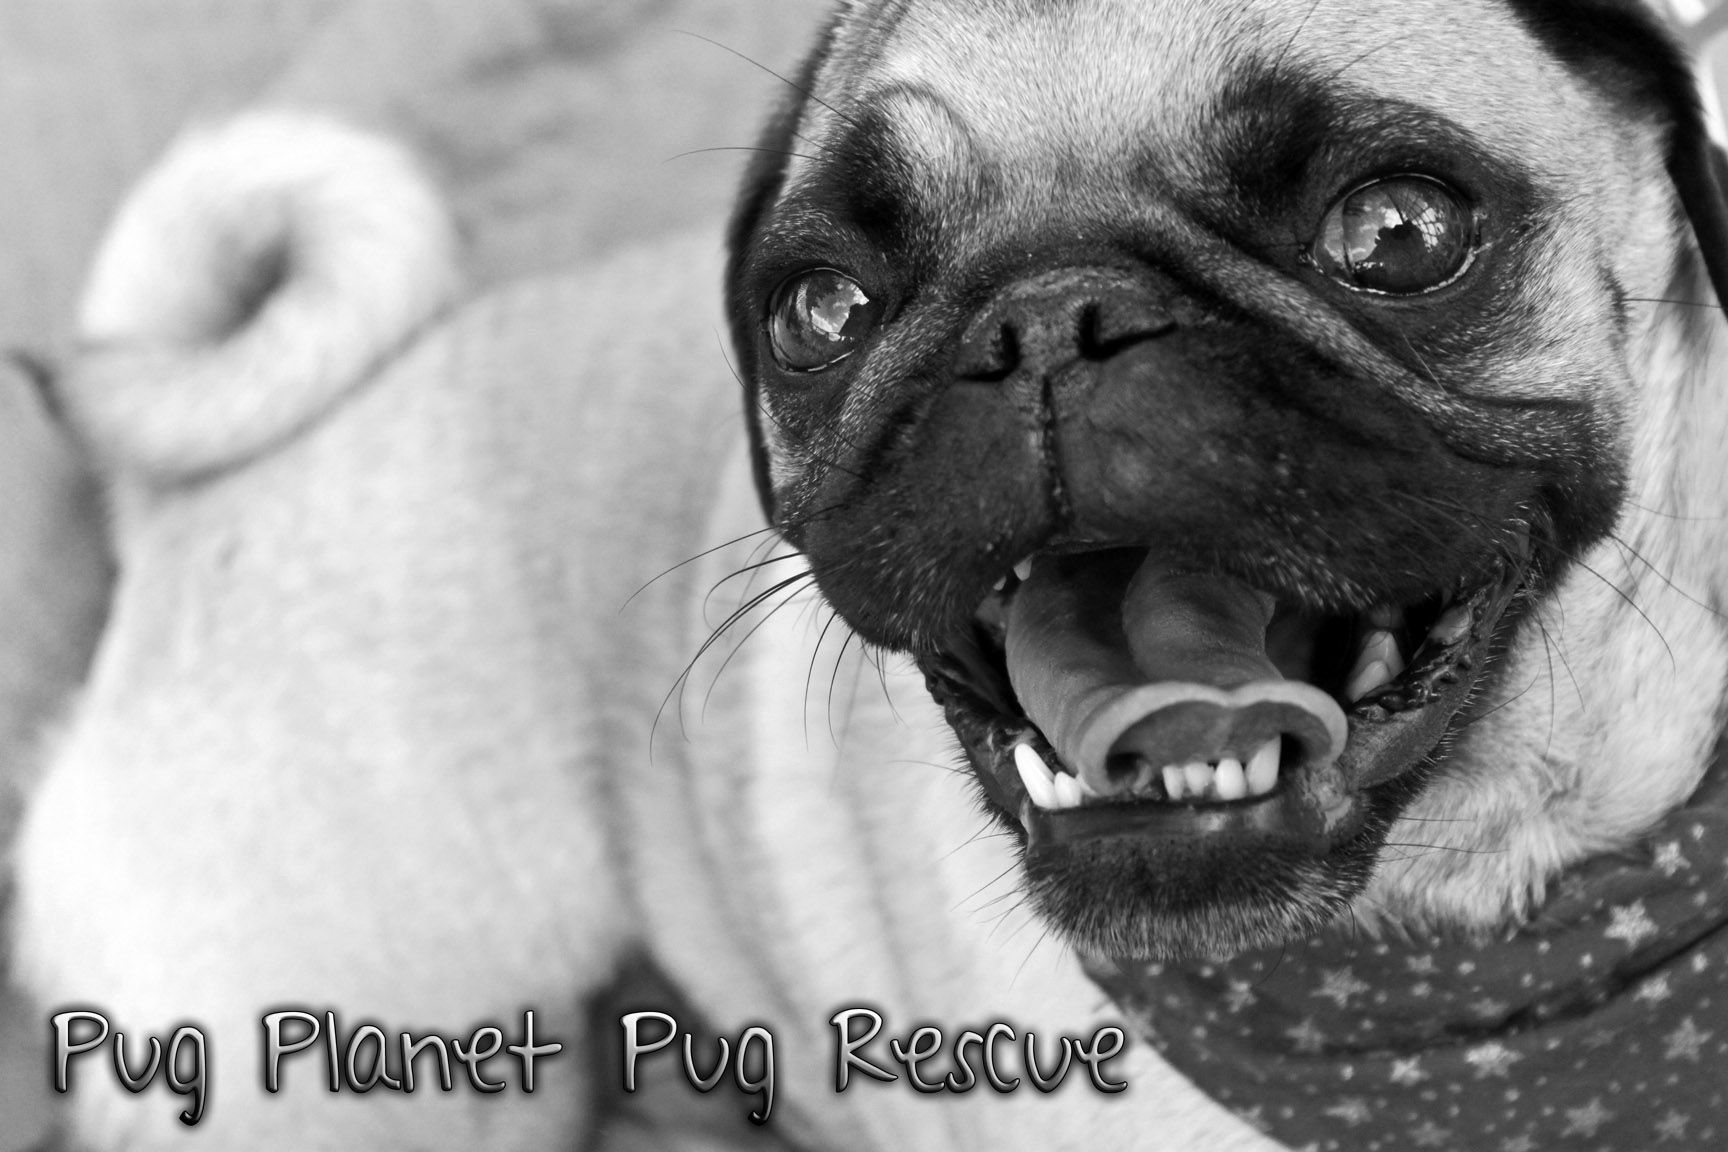 Pets For Adoption At Pug Planet Pug Rescue, In Forked River, Nj | Petfinder